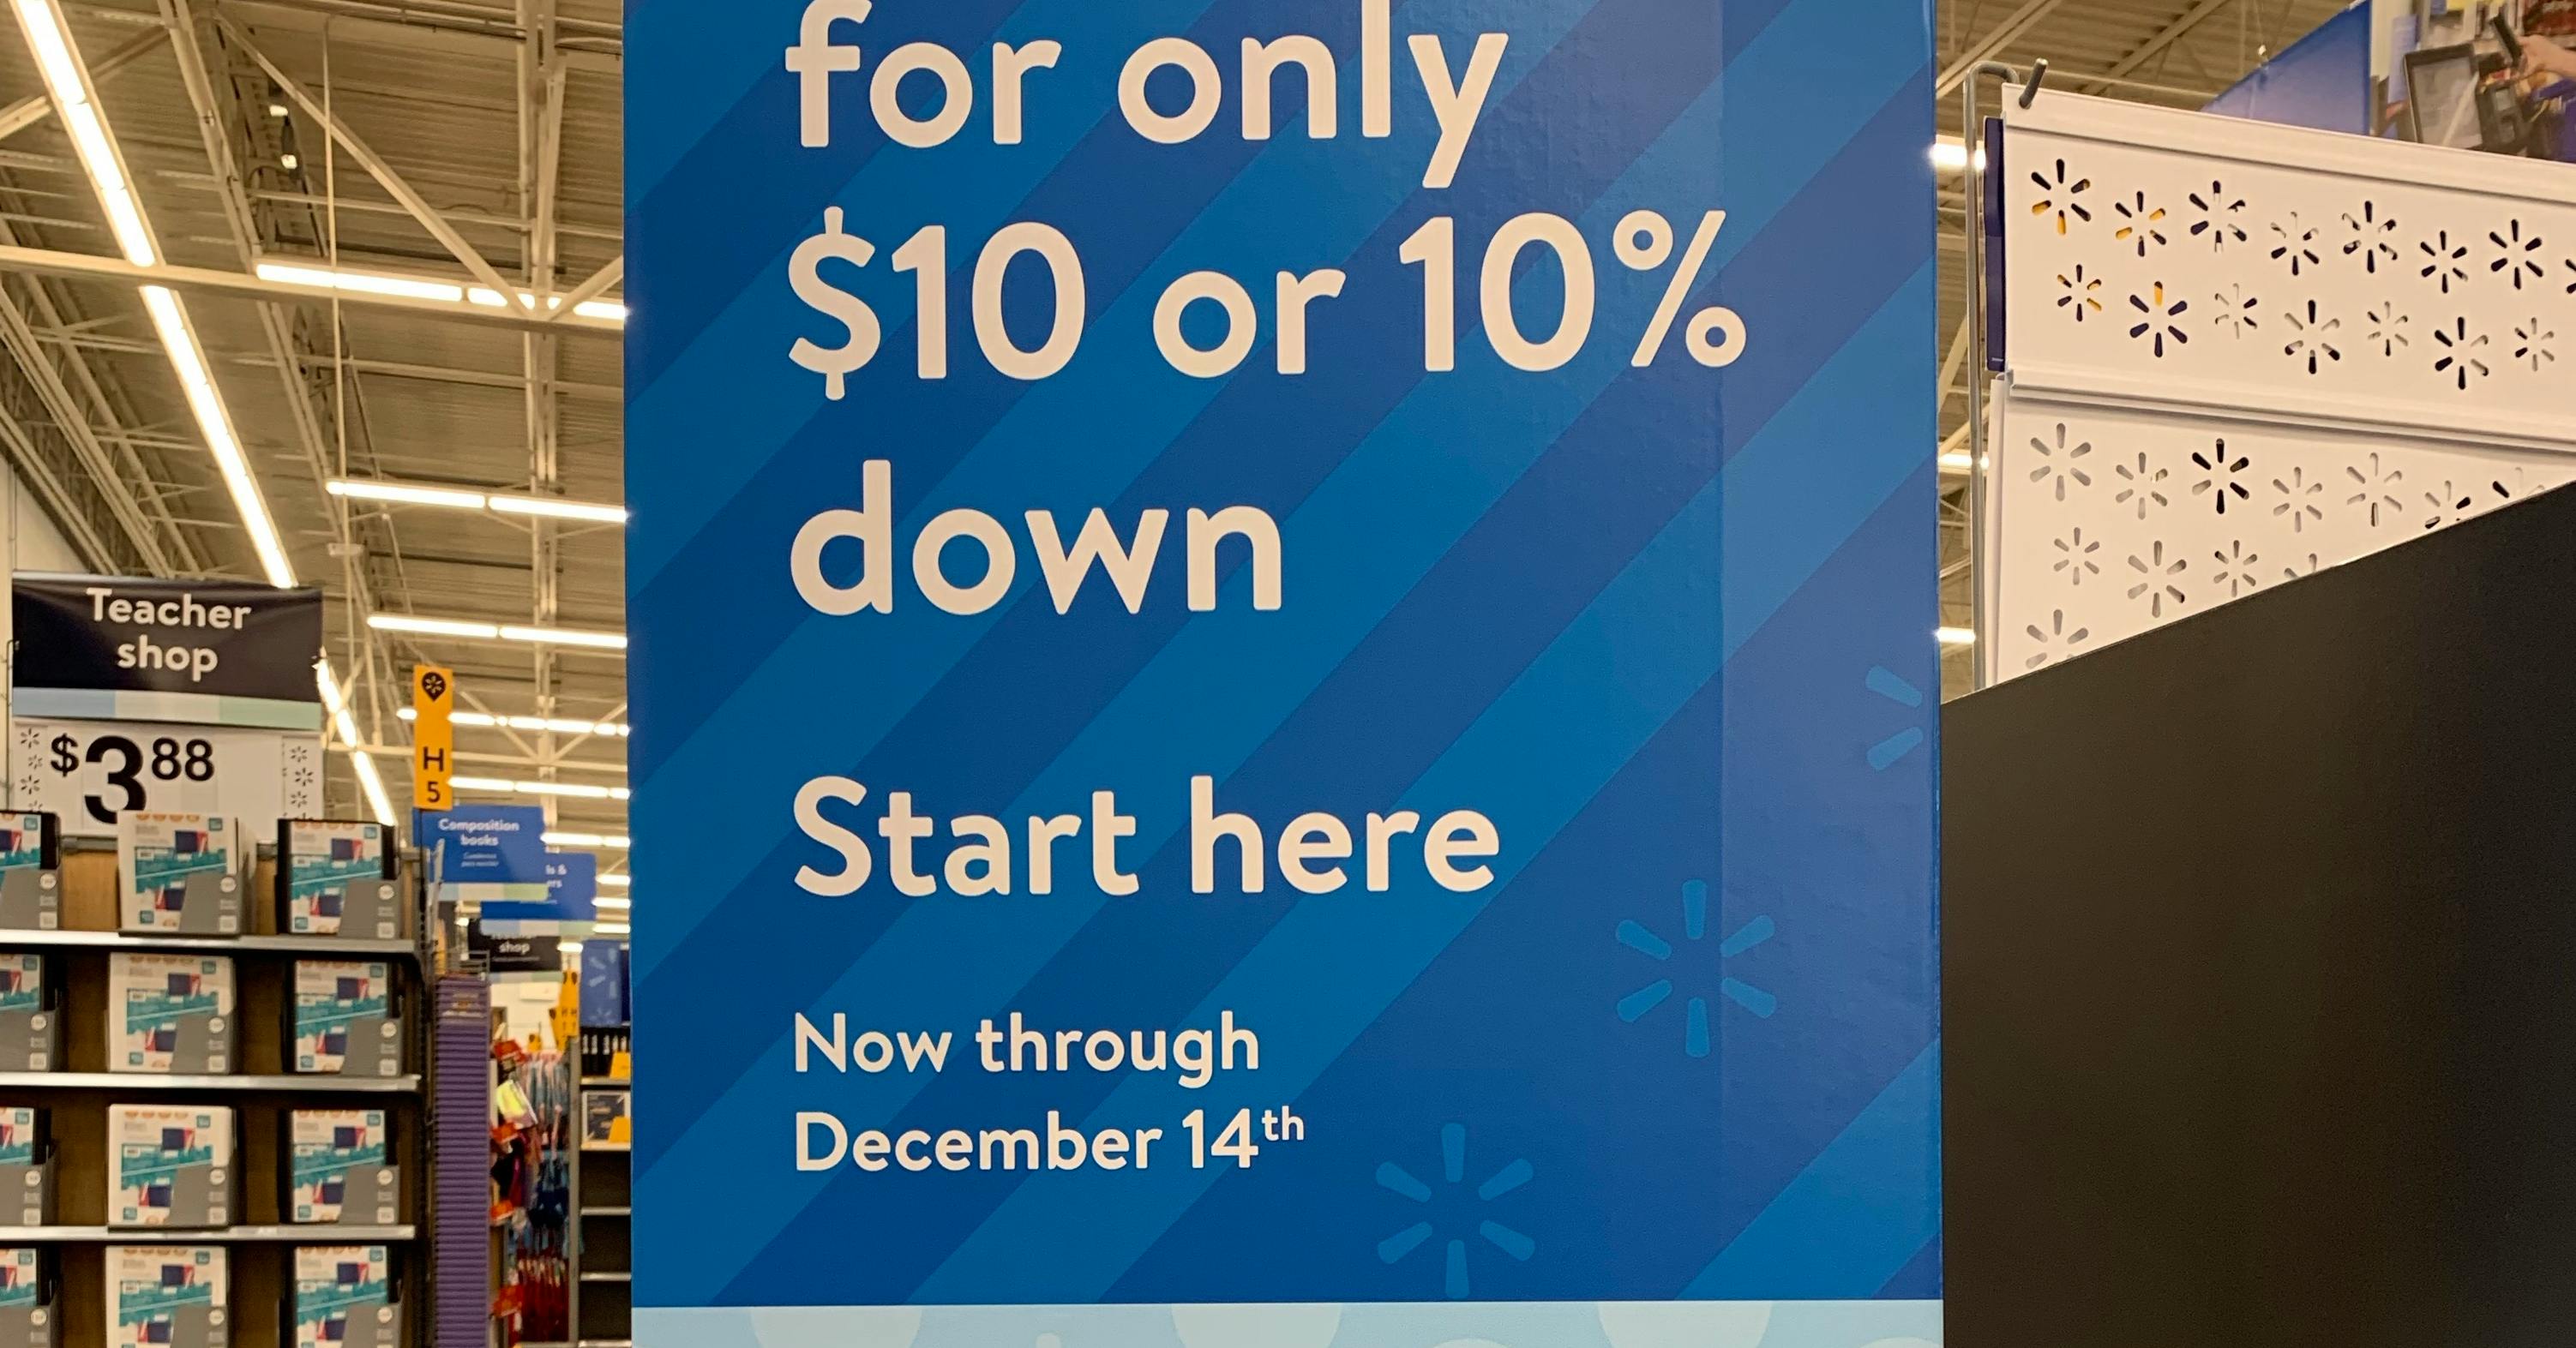 Walmart Layaway Is Gone, but RUN from Affirm! Here's a solution ...